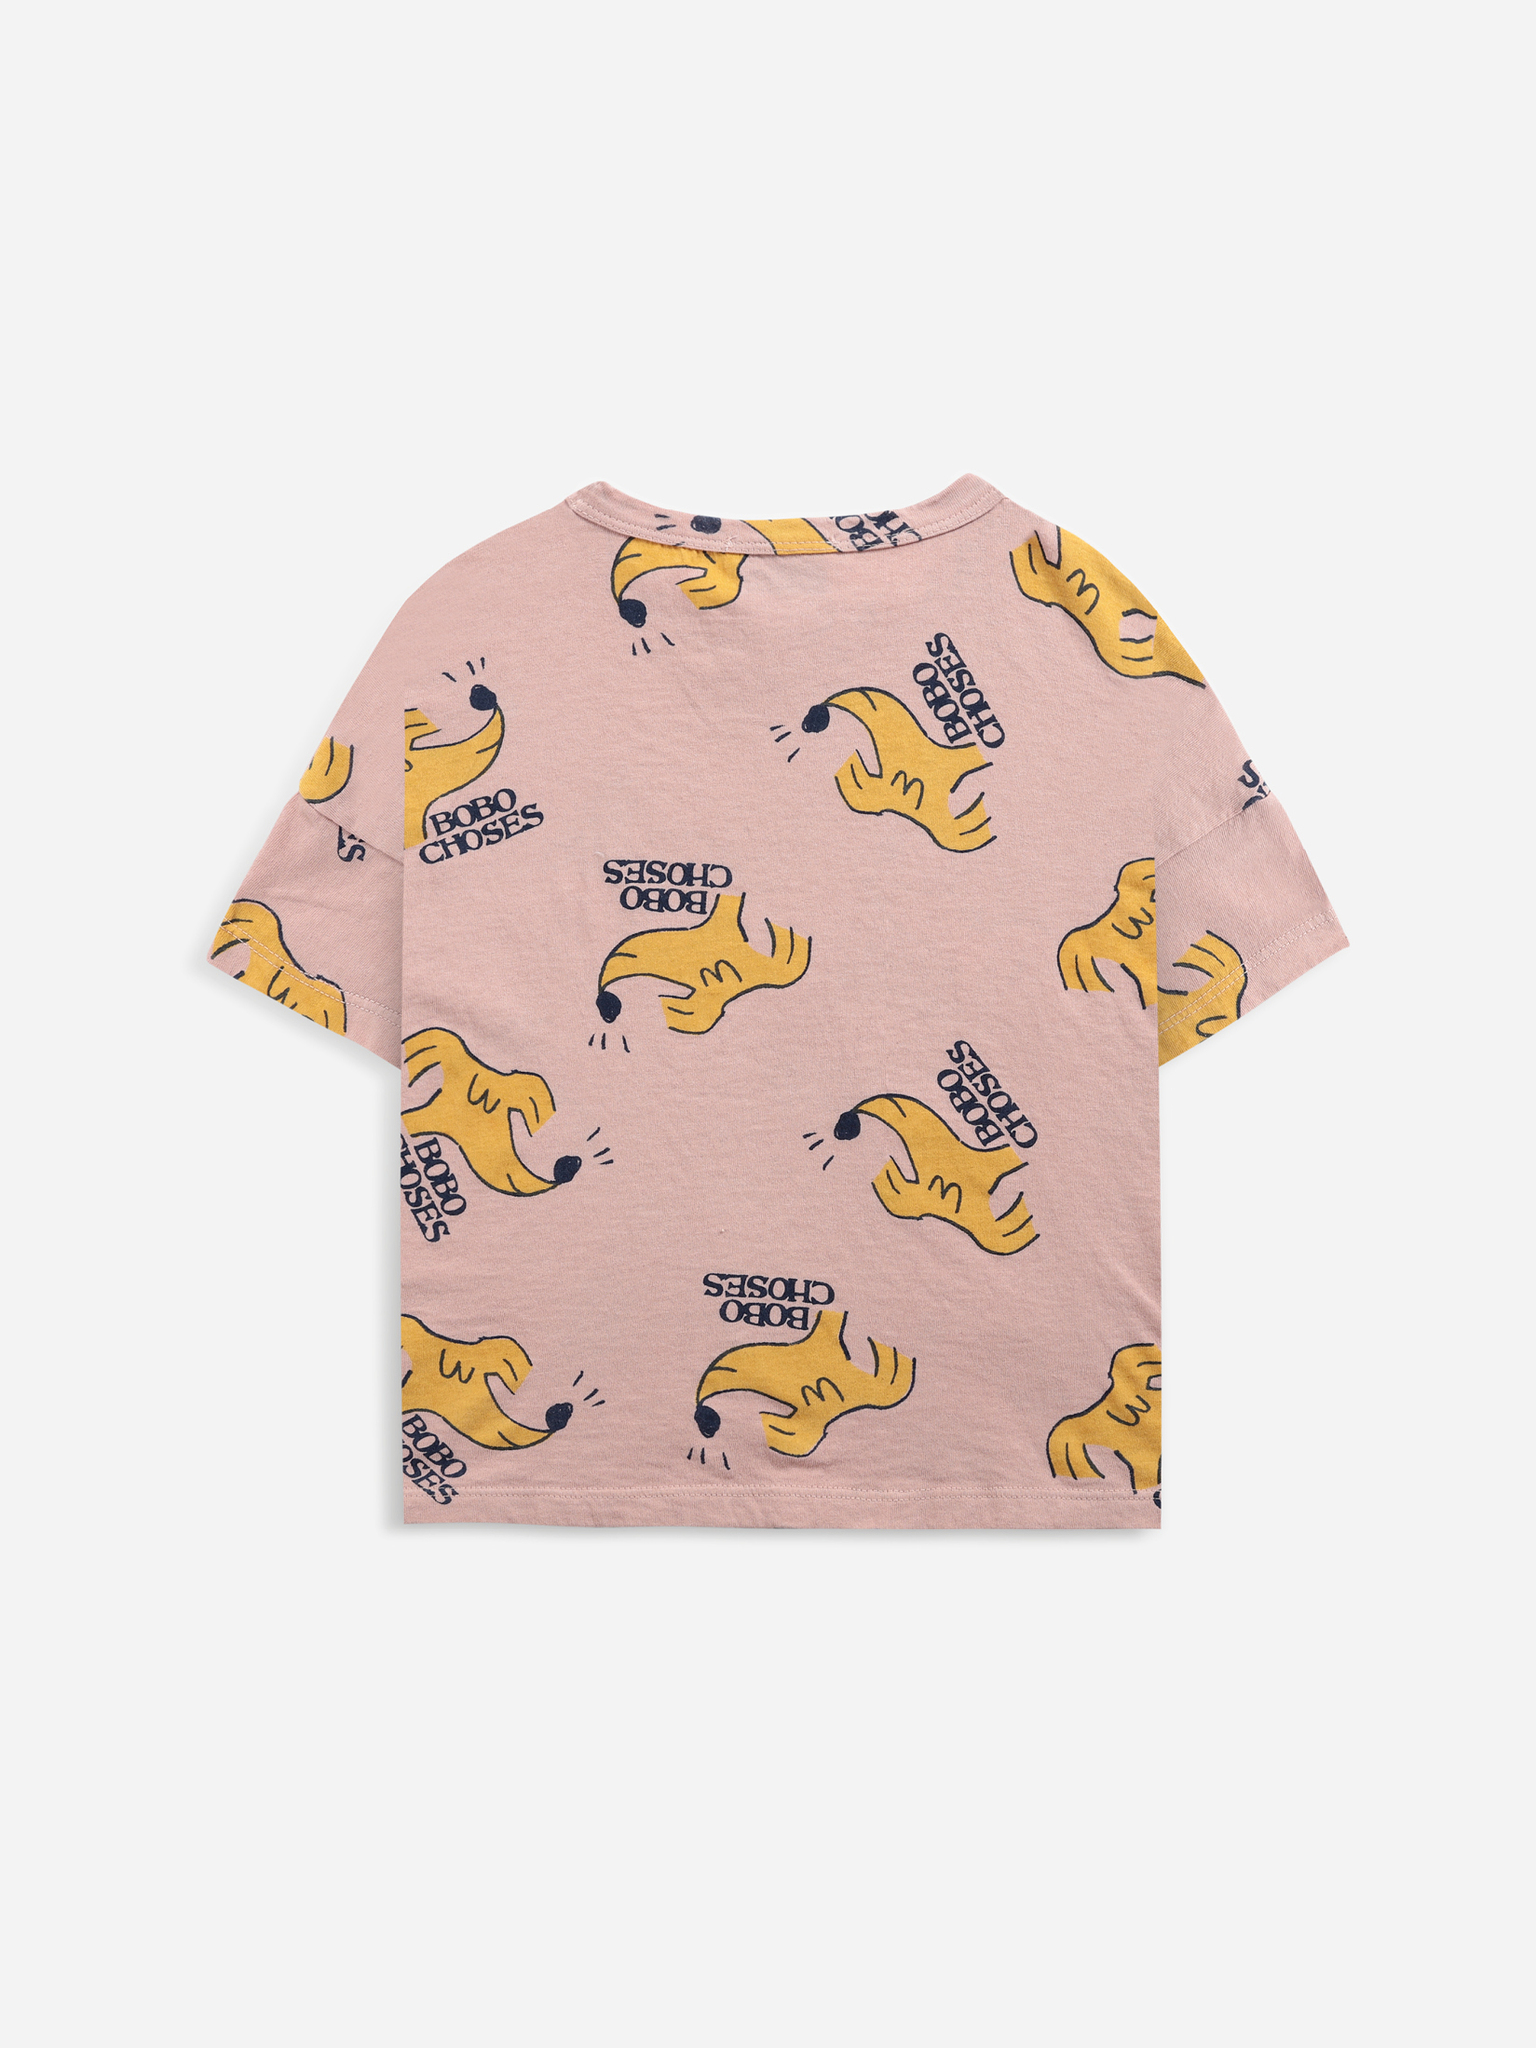 Bobo Choses Sniffy Dog All Over Short Sleeve T-Shirt